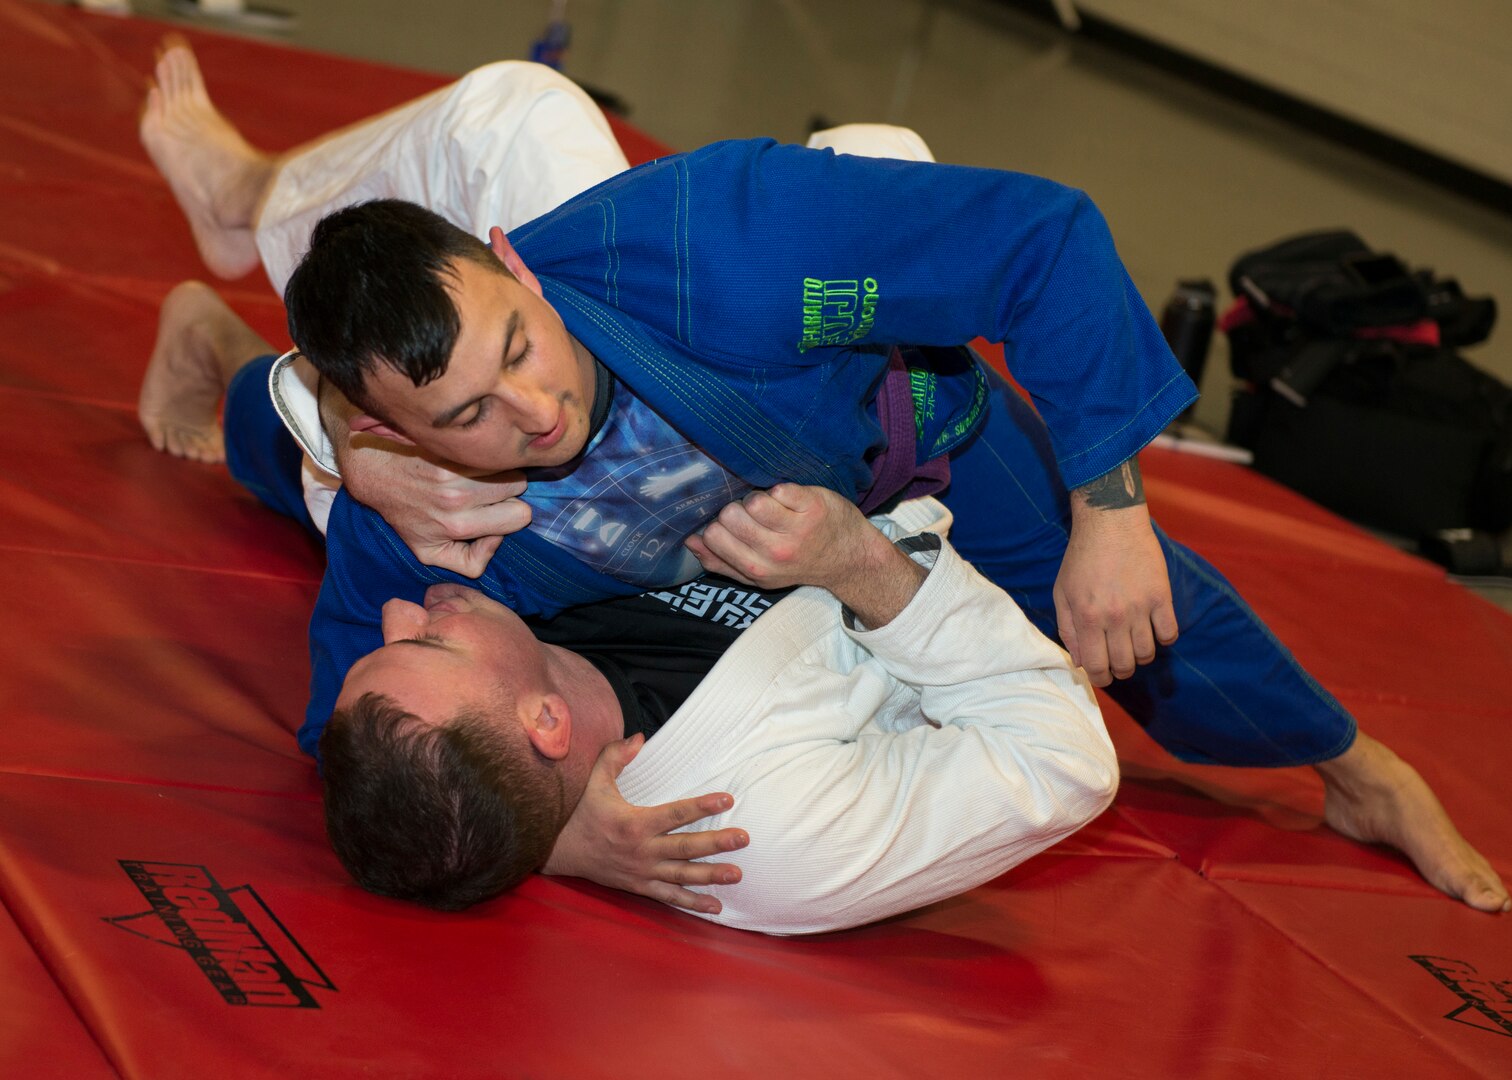 Master Sgt. Ian McMahon, top, 103rd Security Forces Squadron flight chief and combatives instructor, grapples with Tech. Sgt. Brian Davies, 103rd Security Forces Squadron, during an informal jujitsu session at Bradley Air National Guard Base, East Granby, Conn. Jan. 23, 2020.